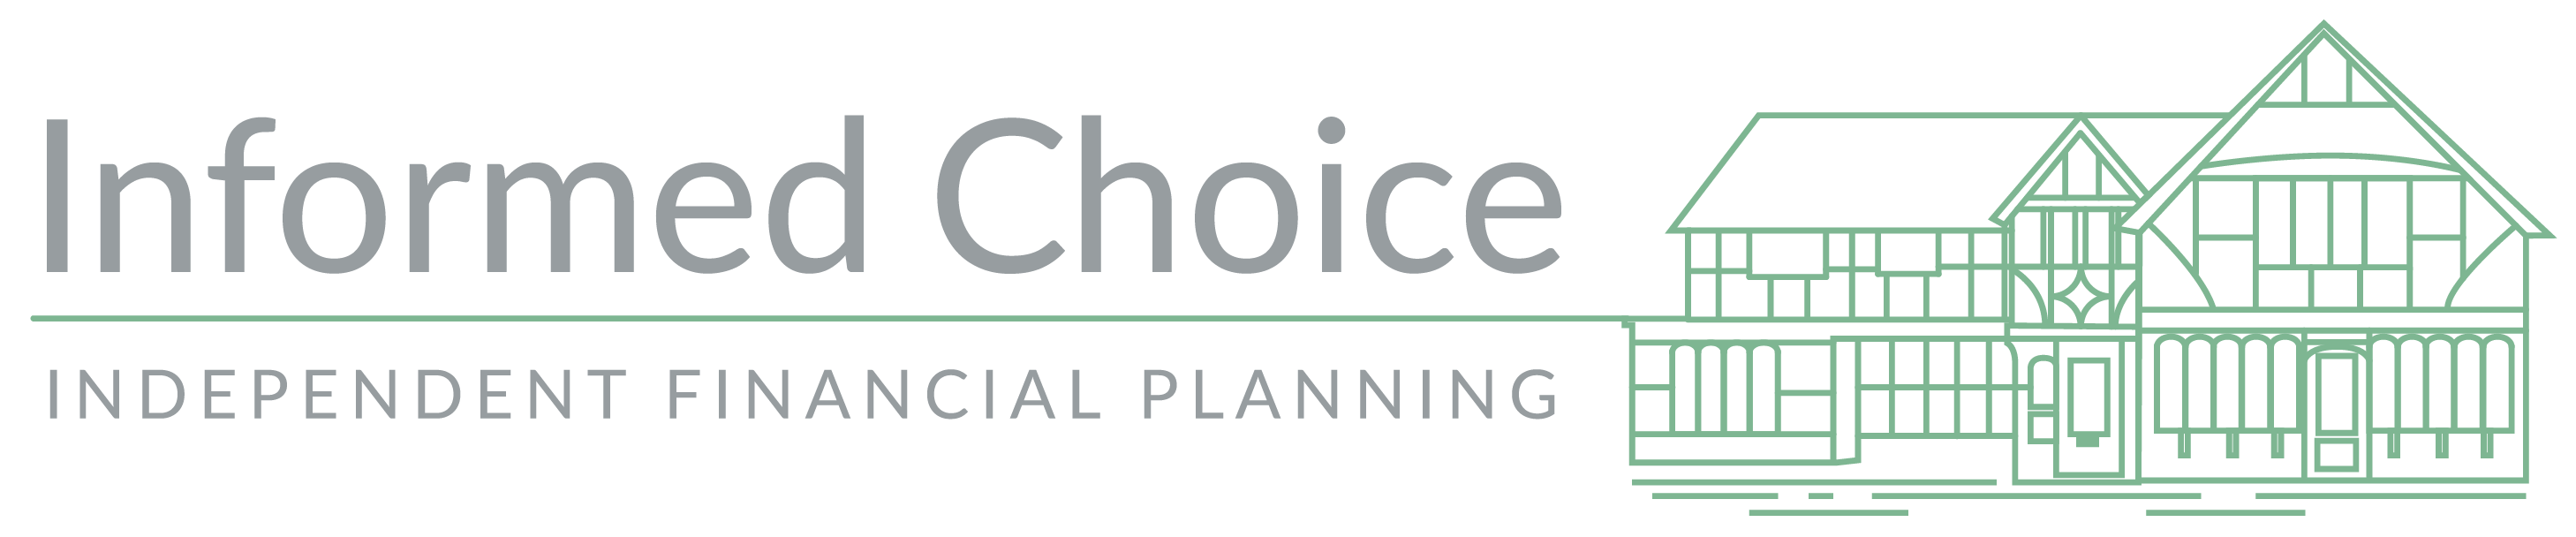 Informed Choice Independent Financial Planners